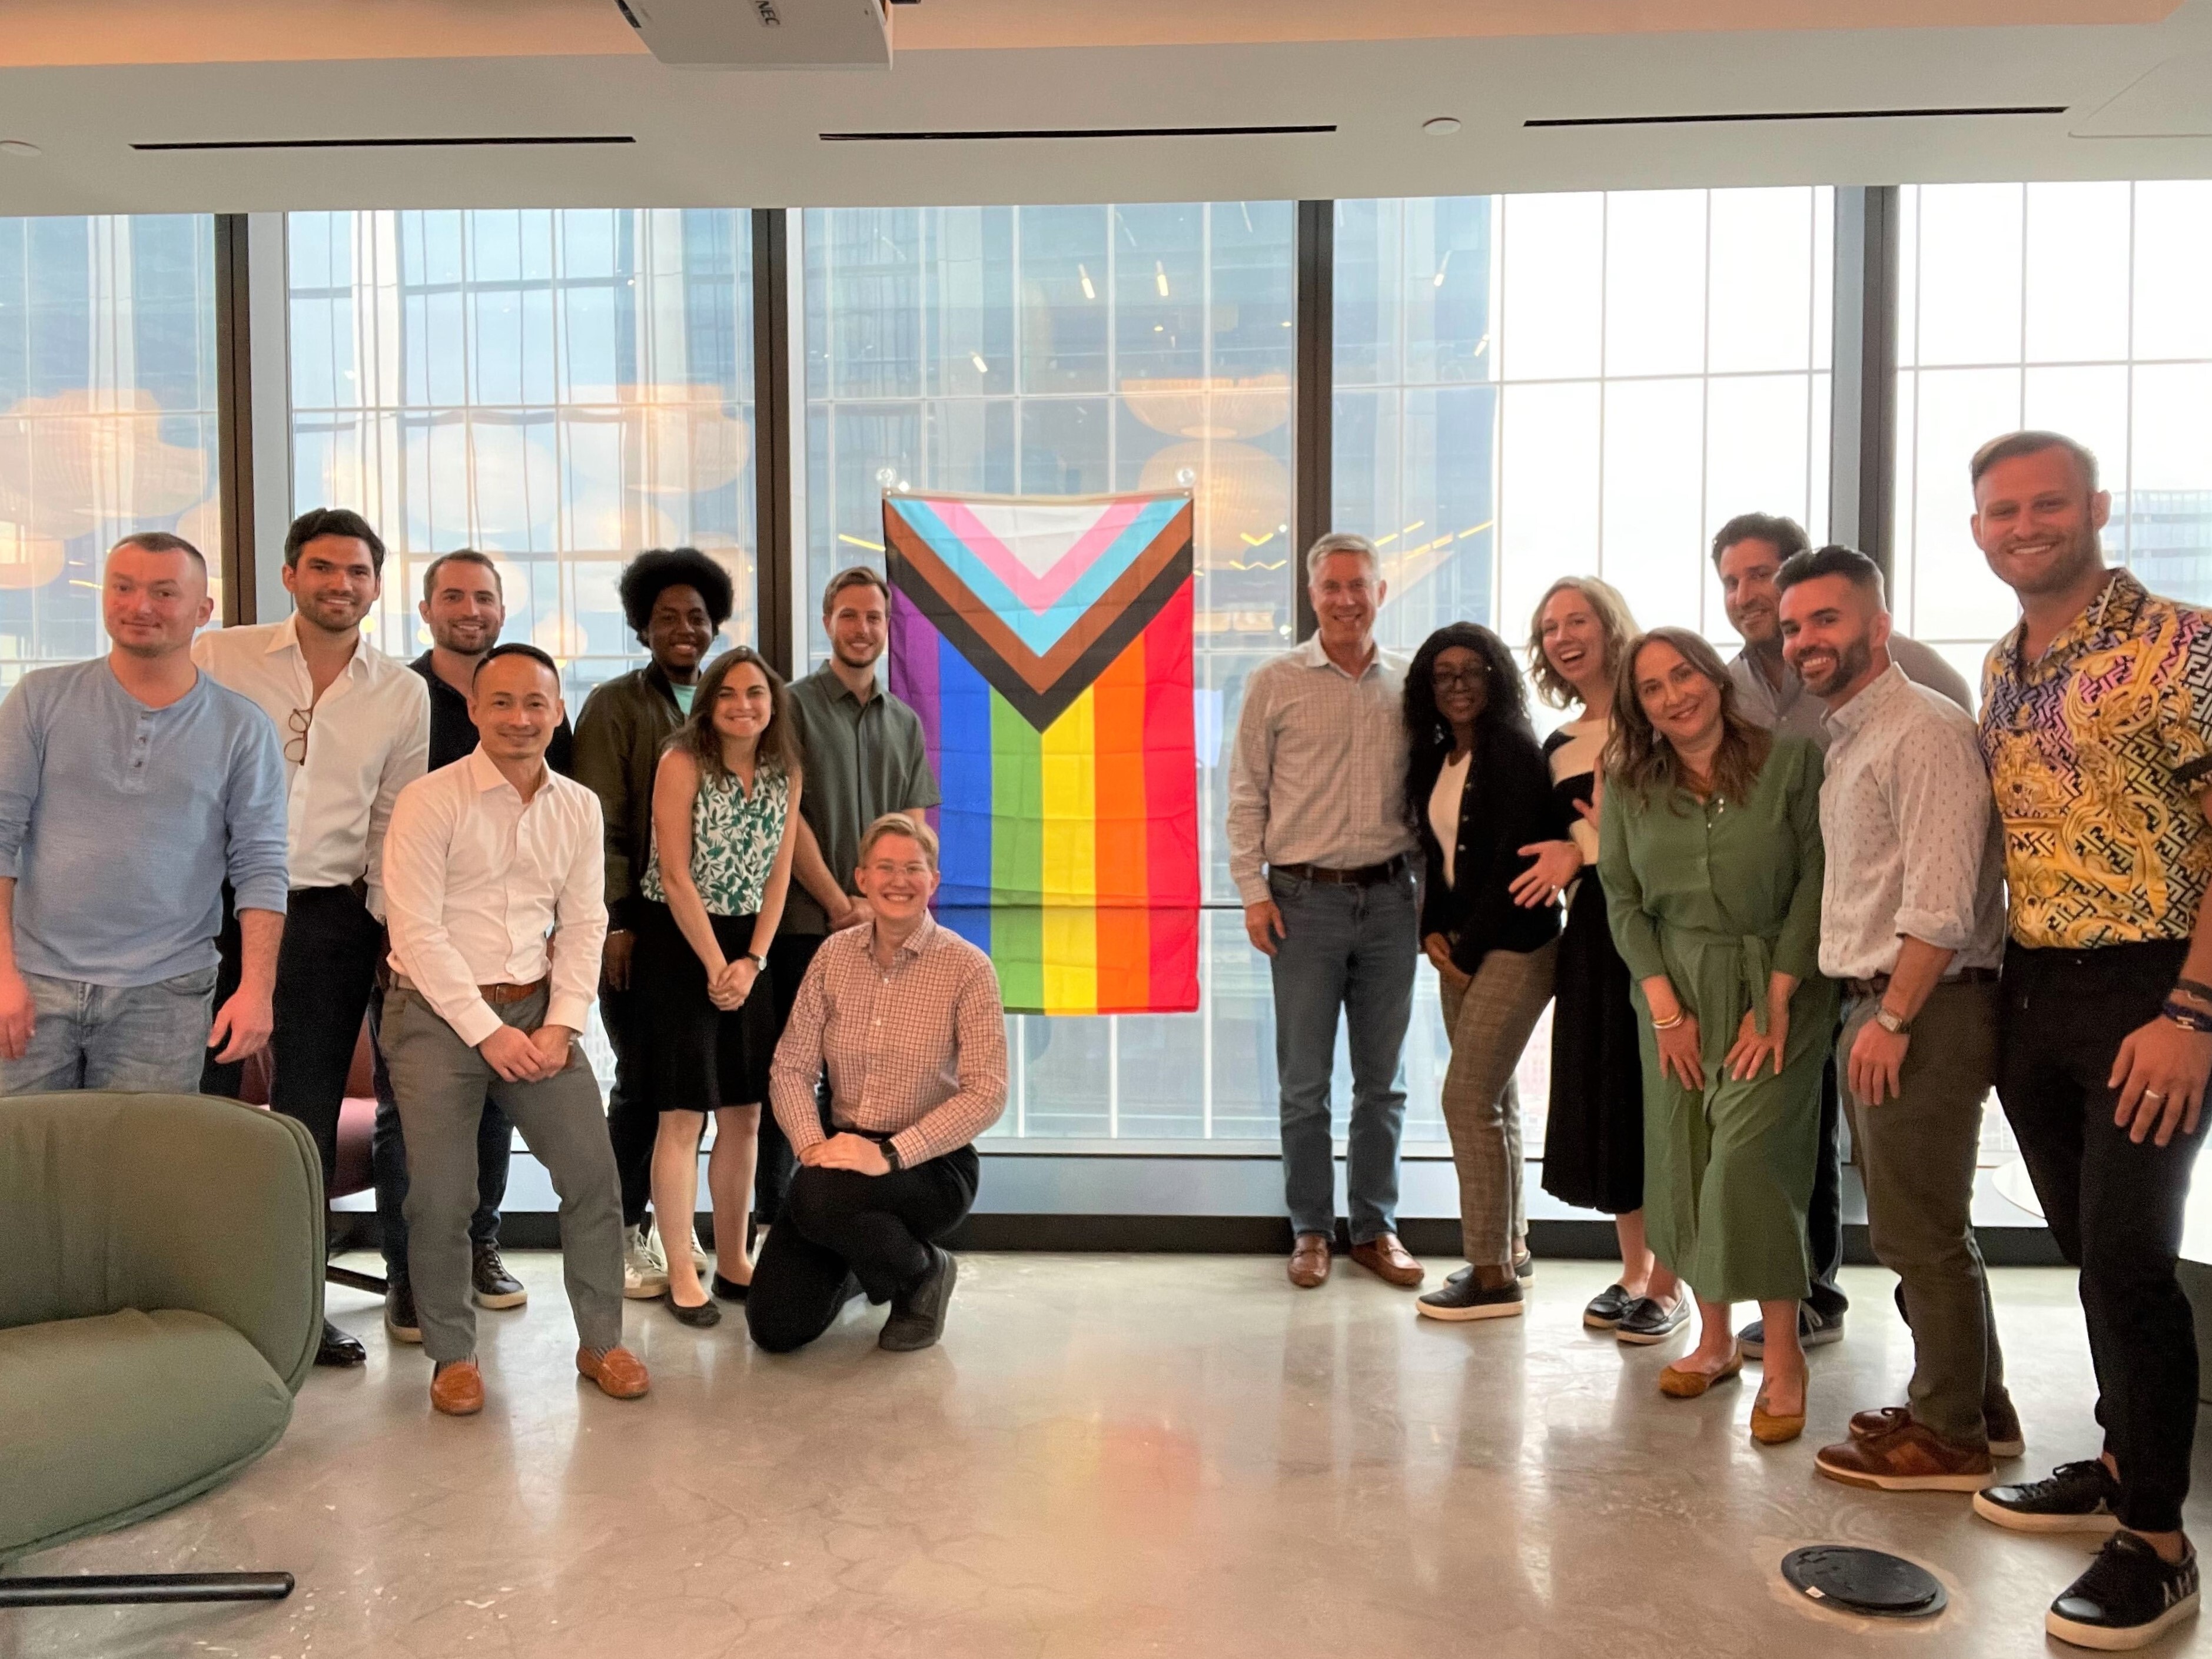 Axiom's CEO stands in front of Pride flag with group of Axiom employees